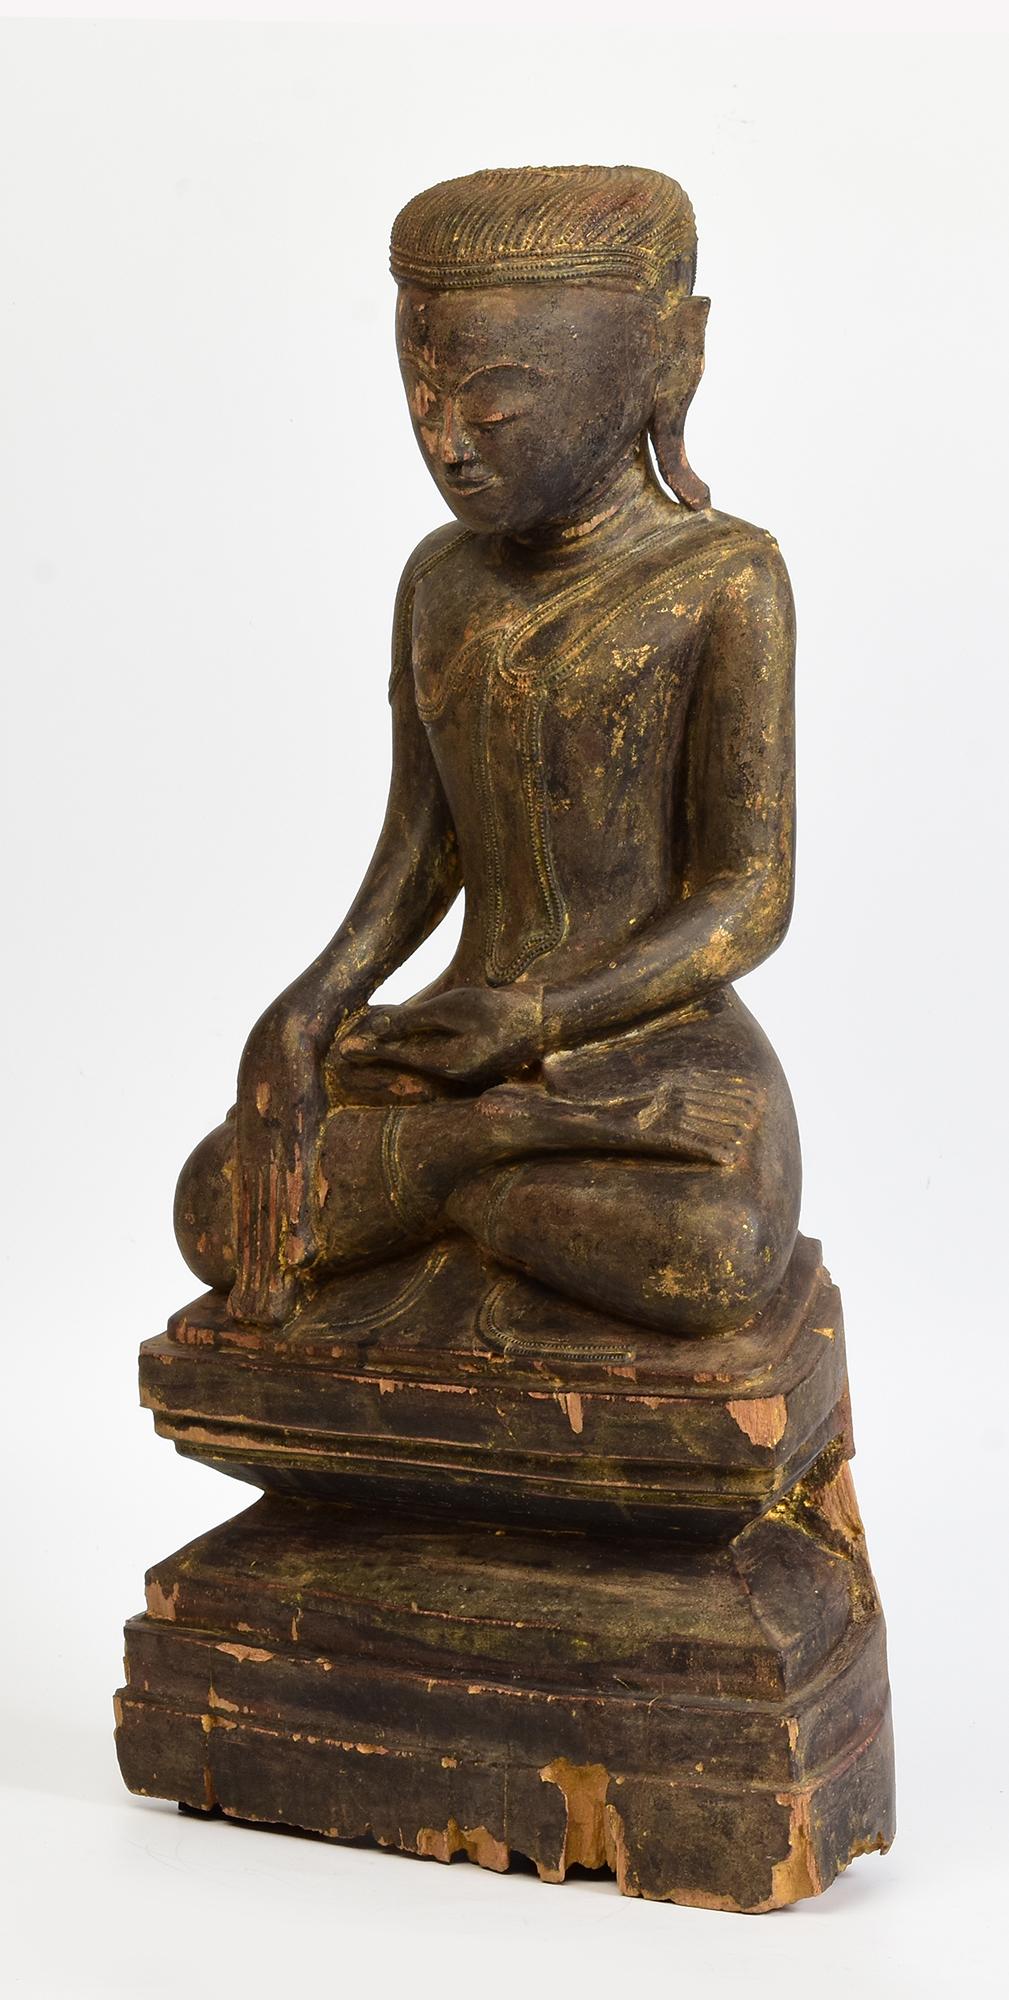 17th - 18th Century, Shan, Antique Burmese Wooden Seated Buddha For Sale 1